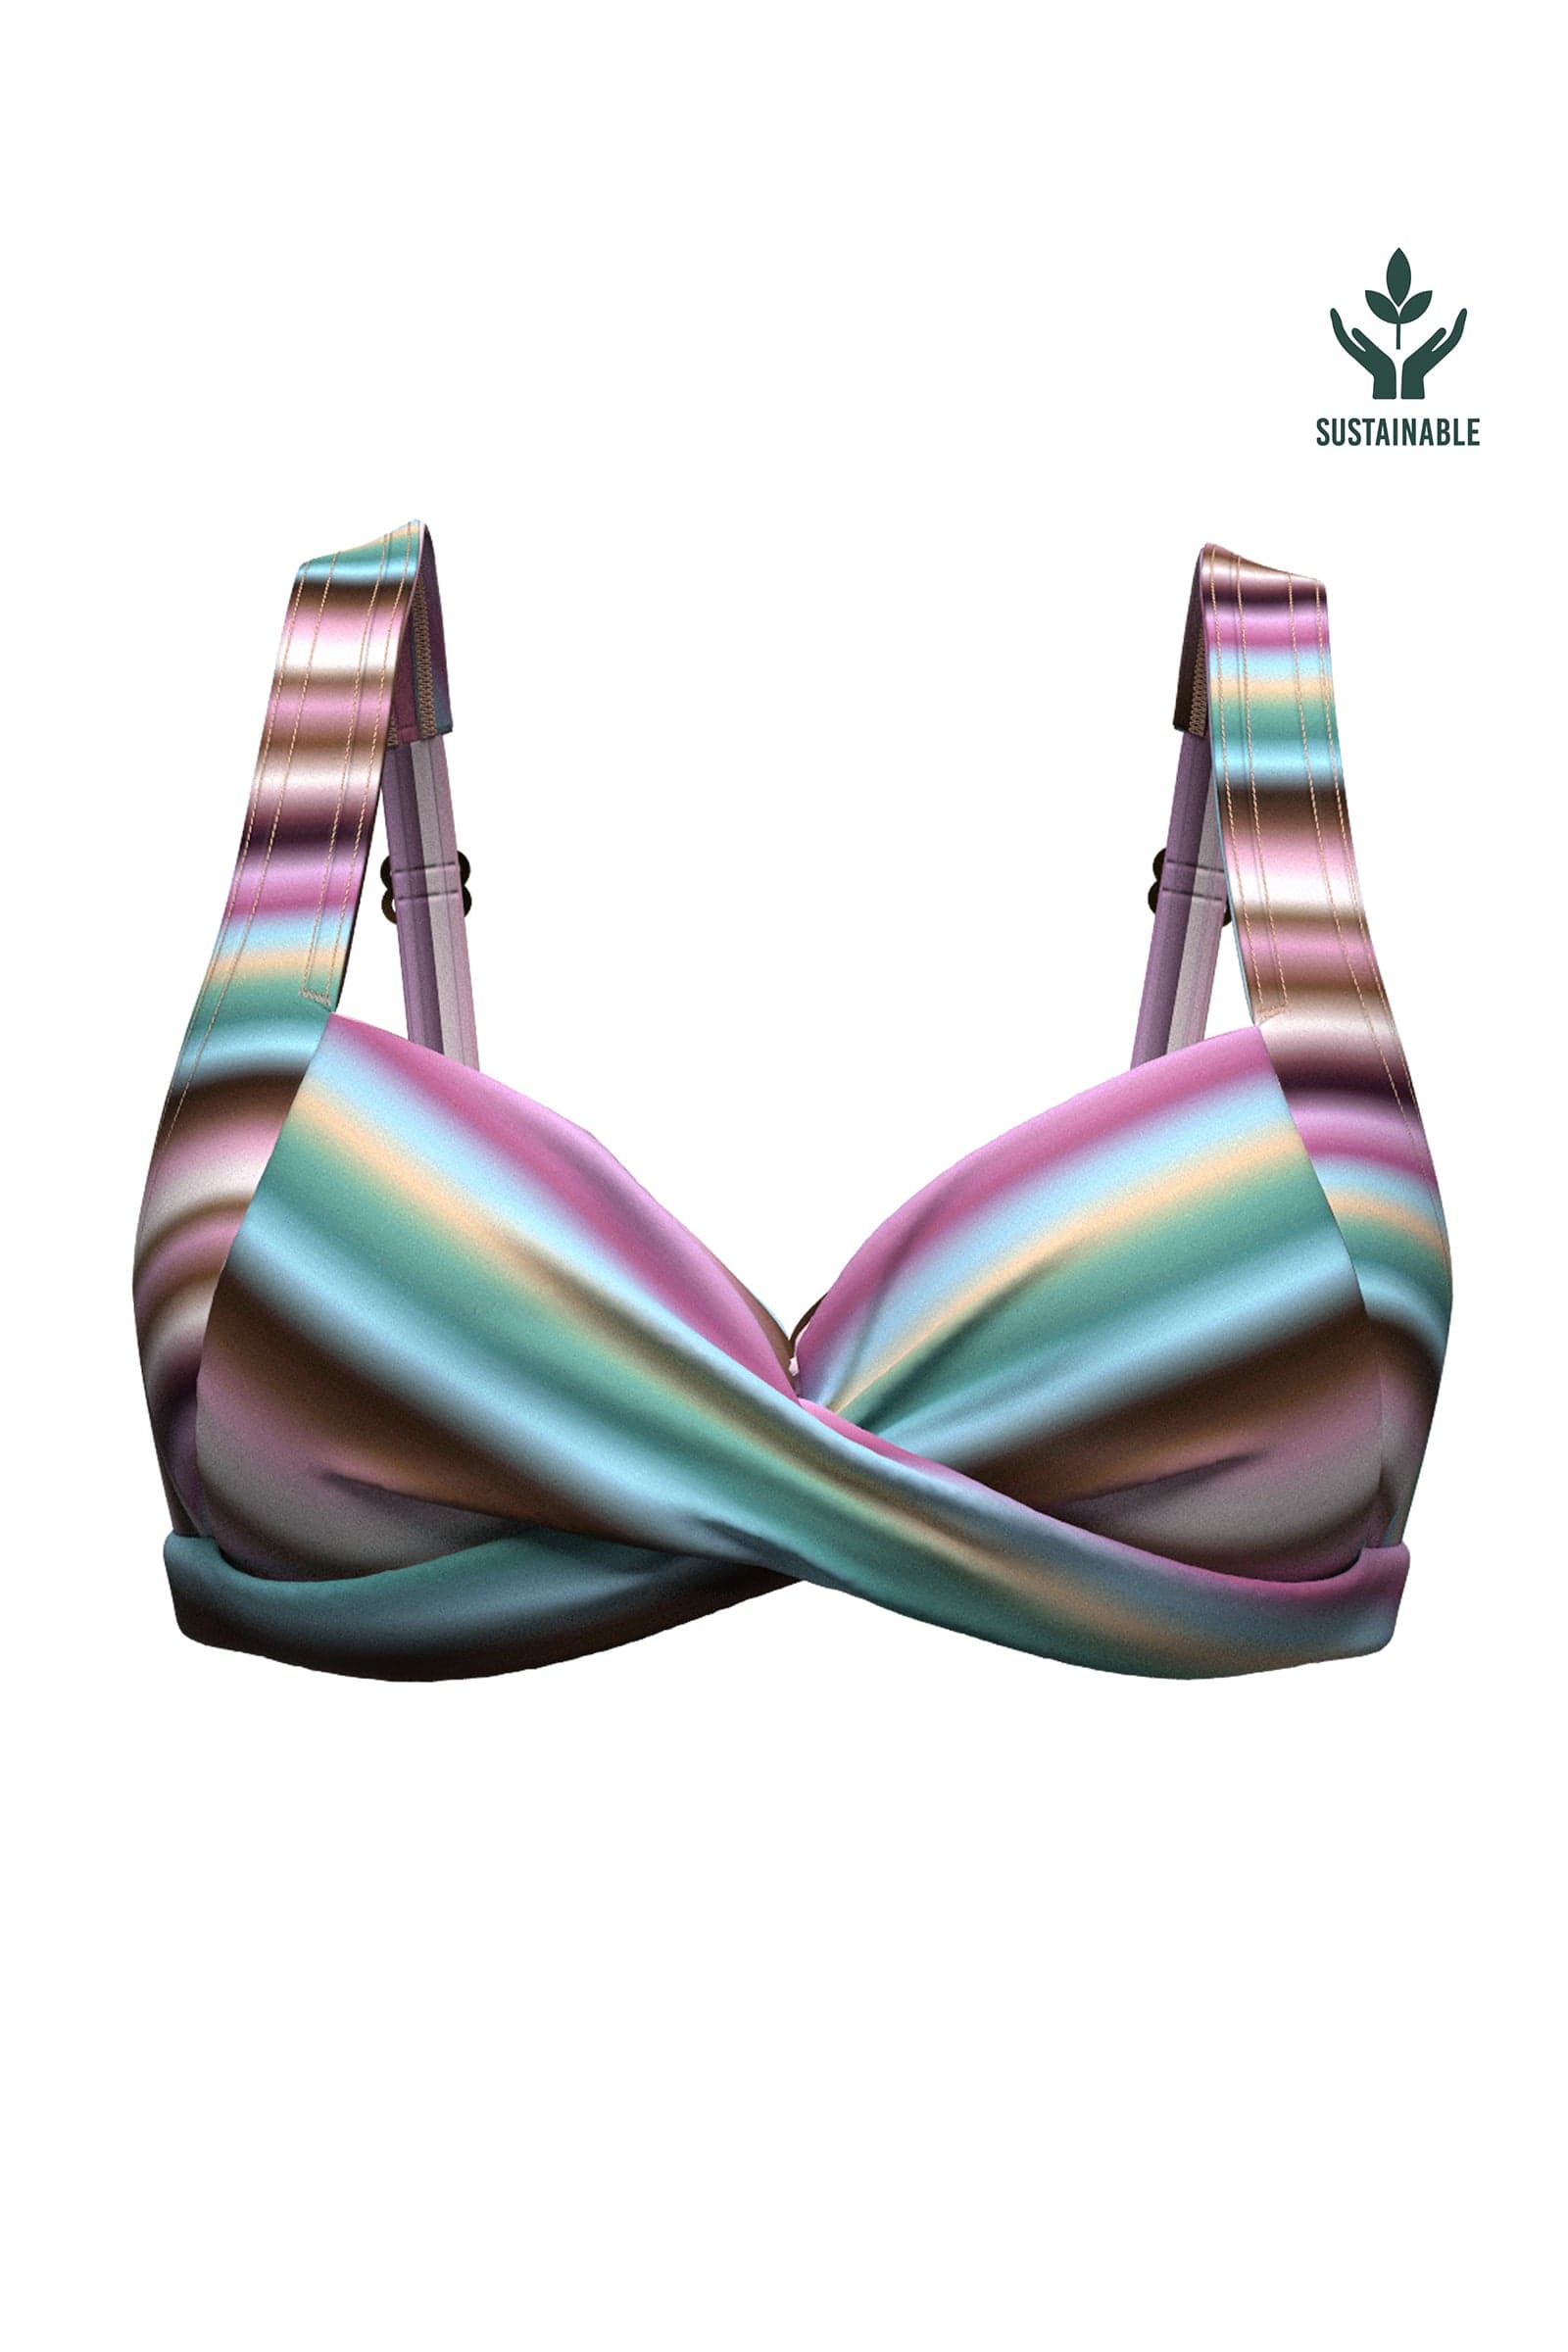 Sunset Paradiso Plus Cup Moulded Underwire Bikini Top